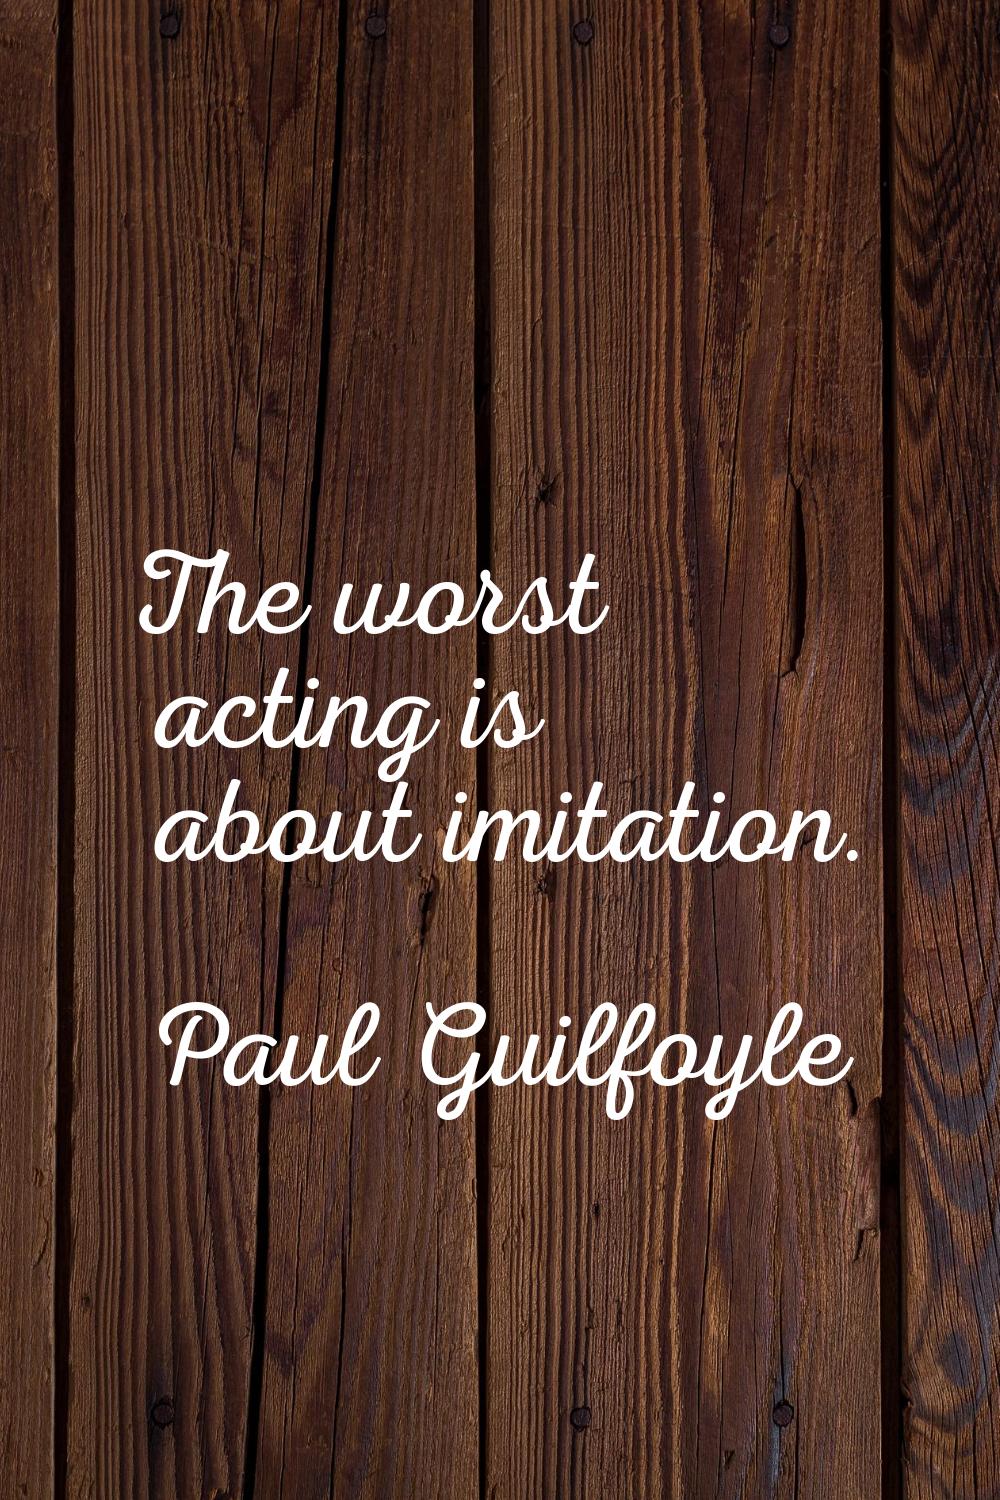 The worst acting is about imitation.